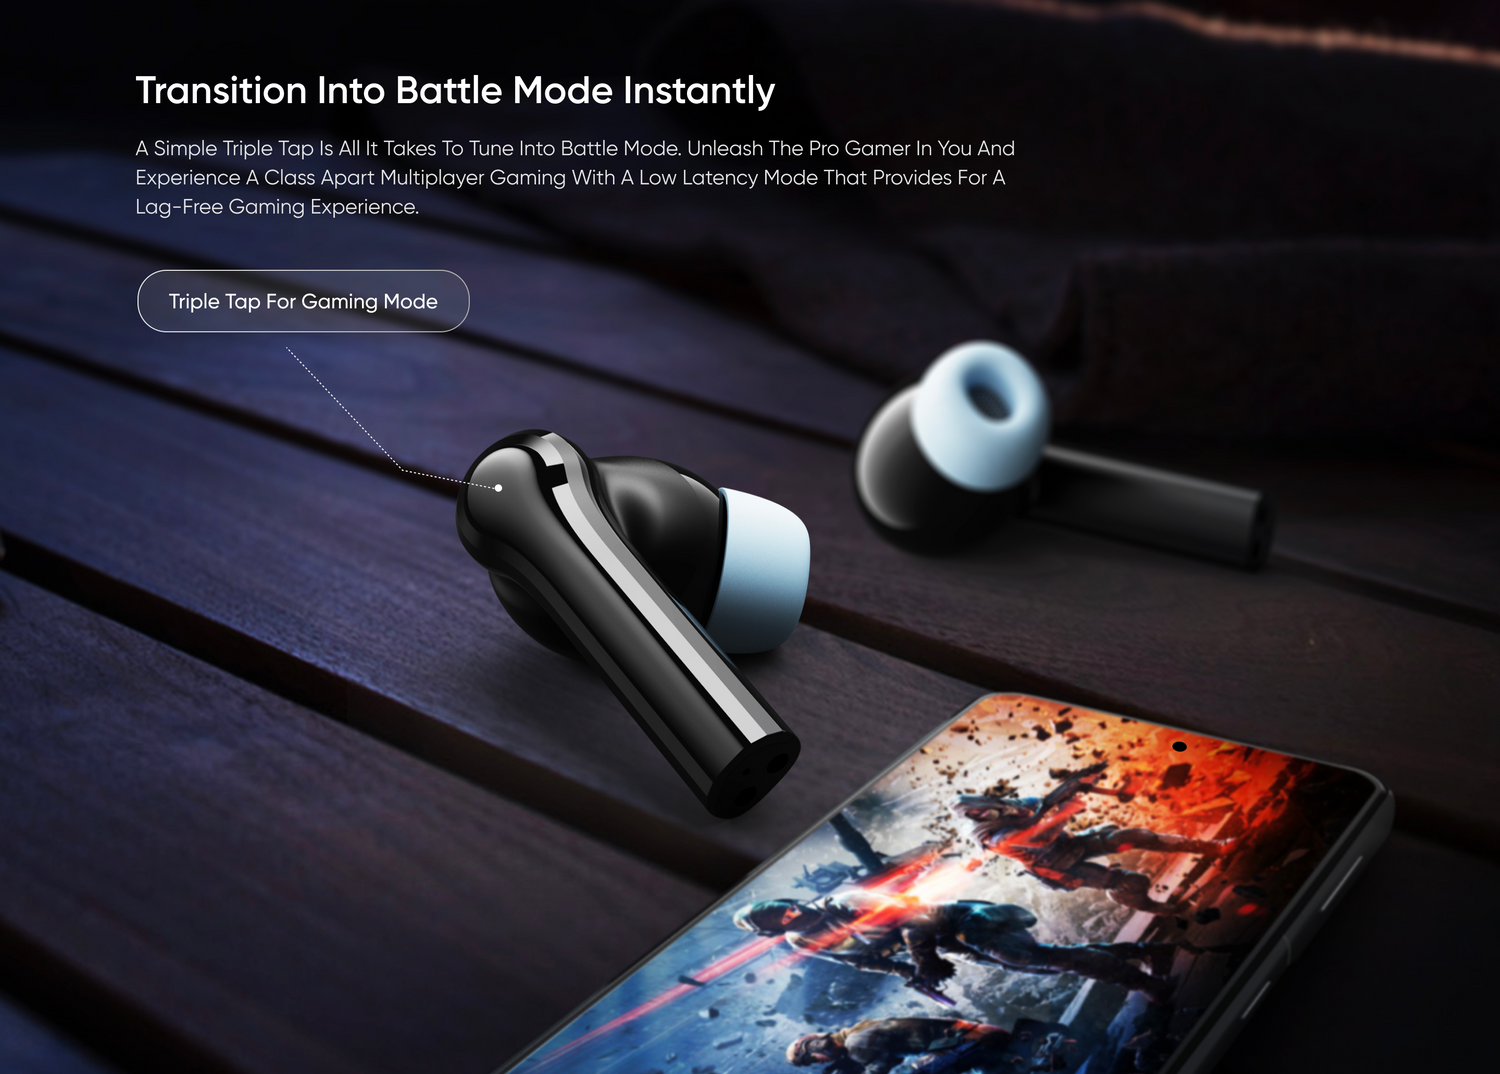 Transition Into Battle Mode Instantly
A Simple Triple Tap Is All It Takes To Tune Into Battle Mode. Unleash The Pro Gamer In You And Experience A Class Apart Multiplayer Gaming With A Low Latency Mode That Provides For A Lag-Free Gaming Experience.
Triple Tap For Gaming Mode.